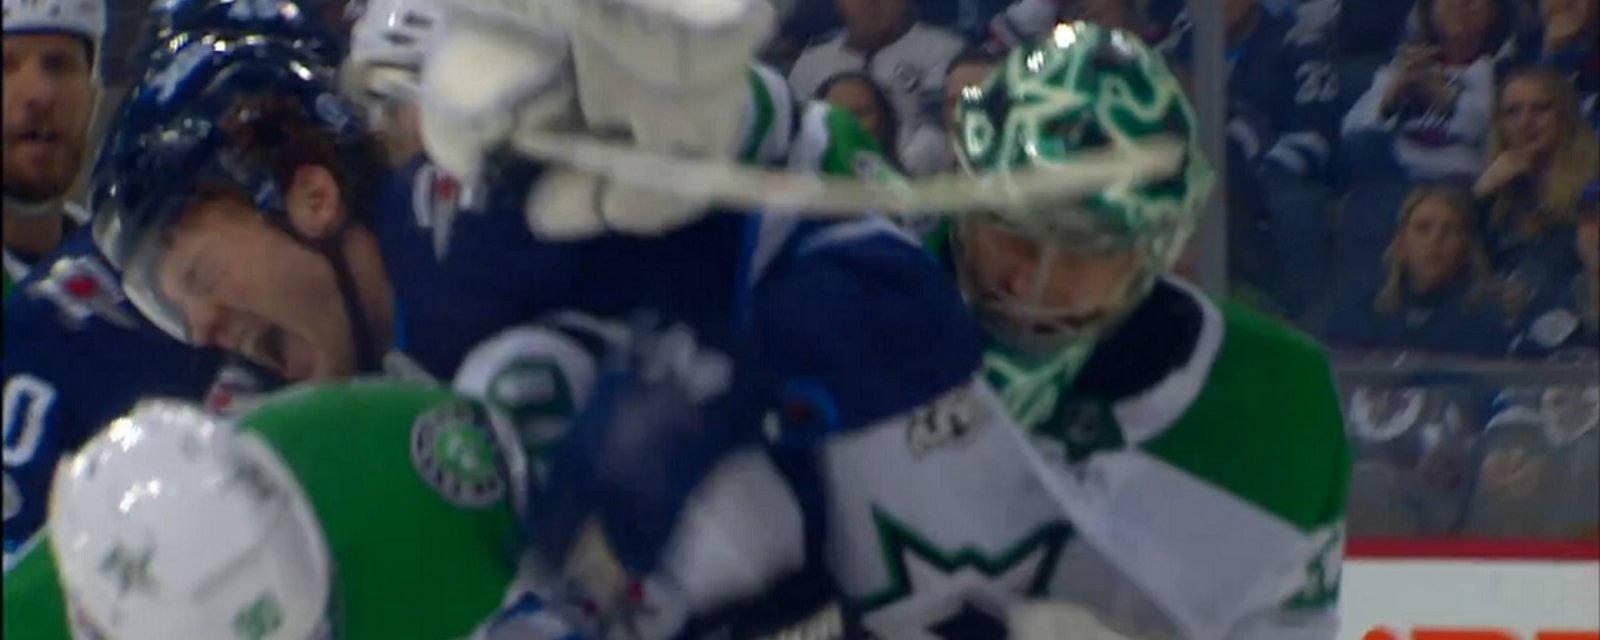 Ben Bishop punches Lemieux right in the face with his blocker. 